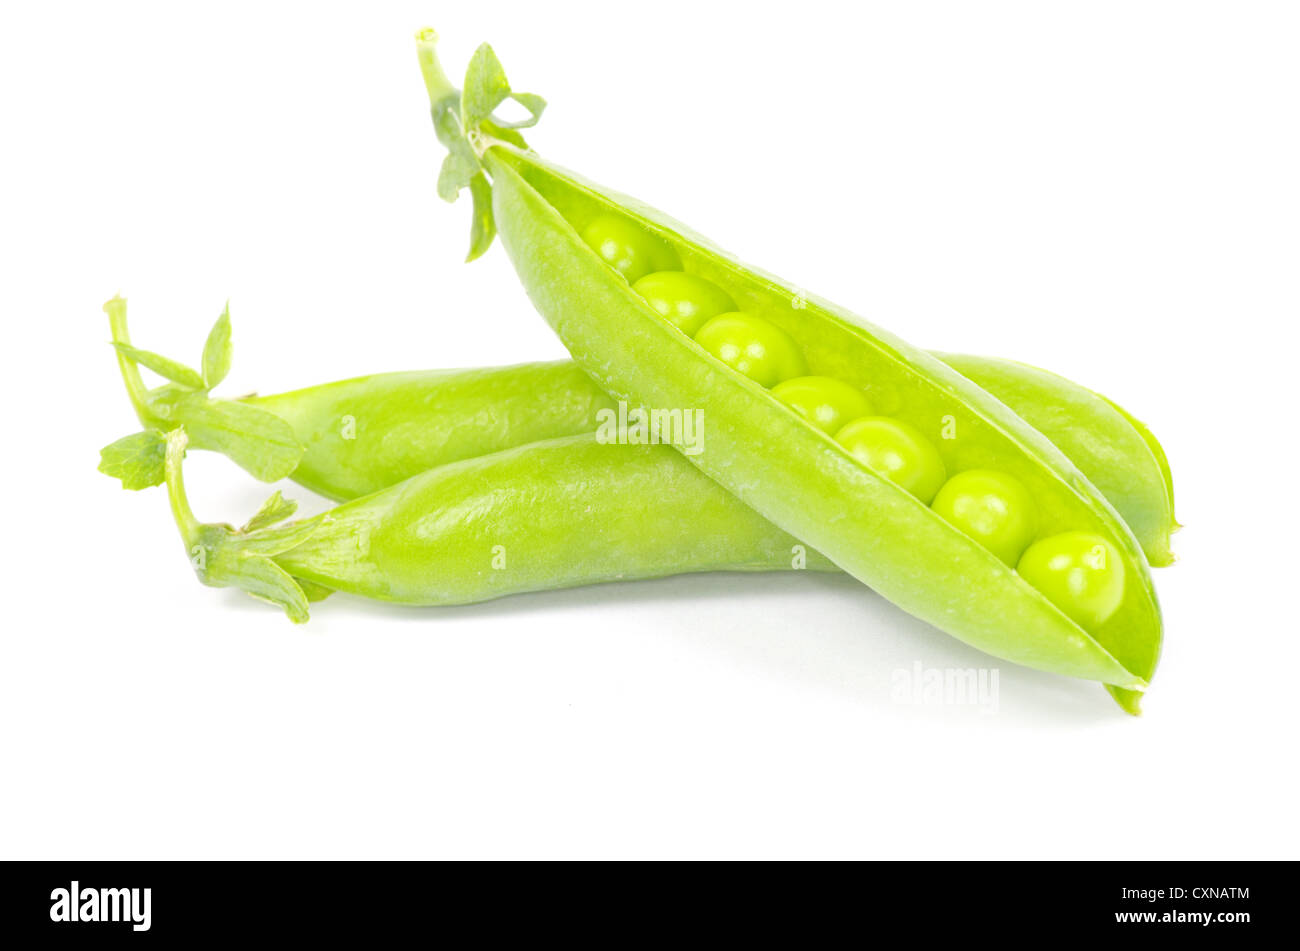 Petits pois légumes libre isolated on white Banque D'Images